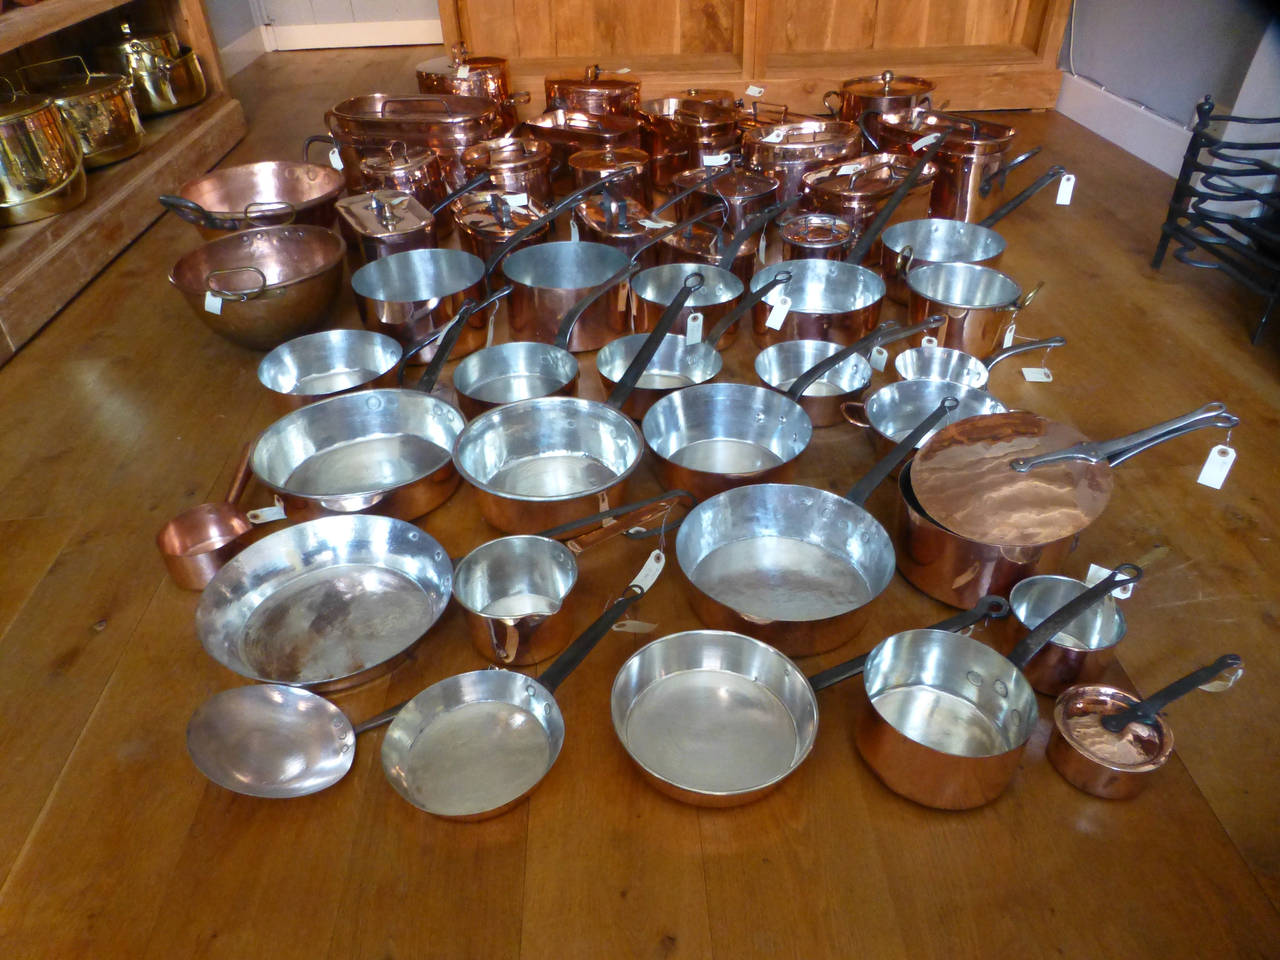 Collection of 50 French newly polished and re tinned antique copper pans. The collection is not only very decorative, but in addition all copper pans (except one) are ready to use in the kitchen:

12 copper stewing pans - stewpots (19th century,